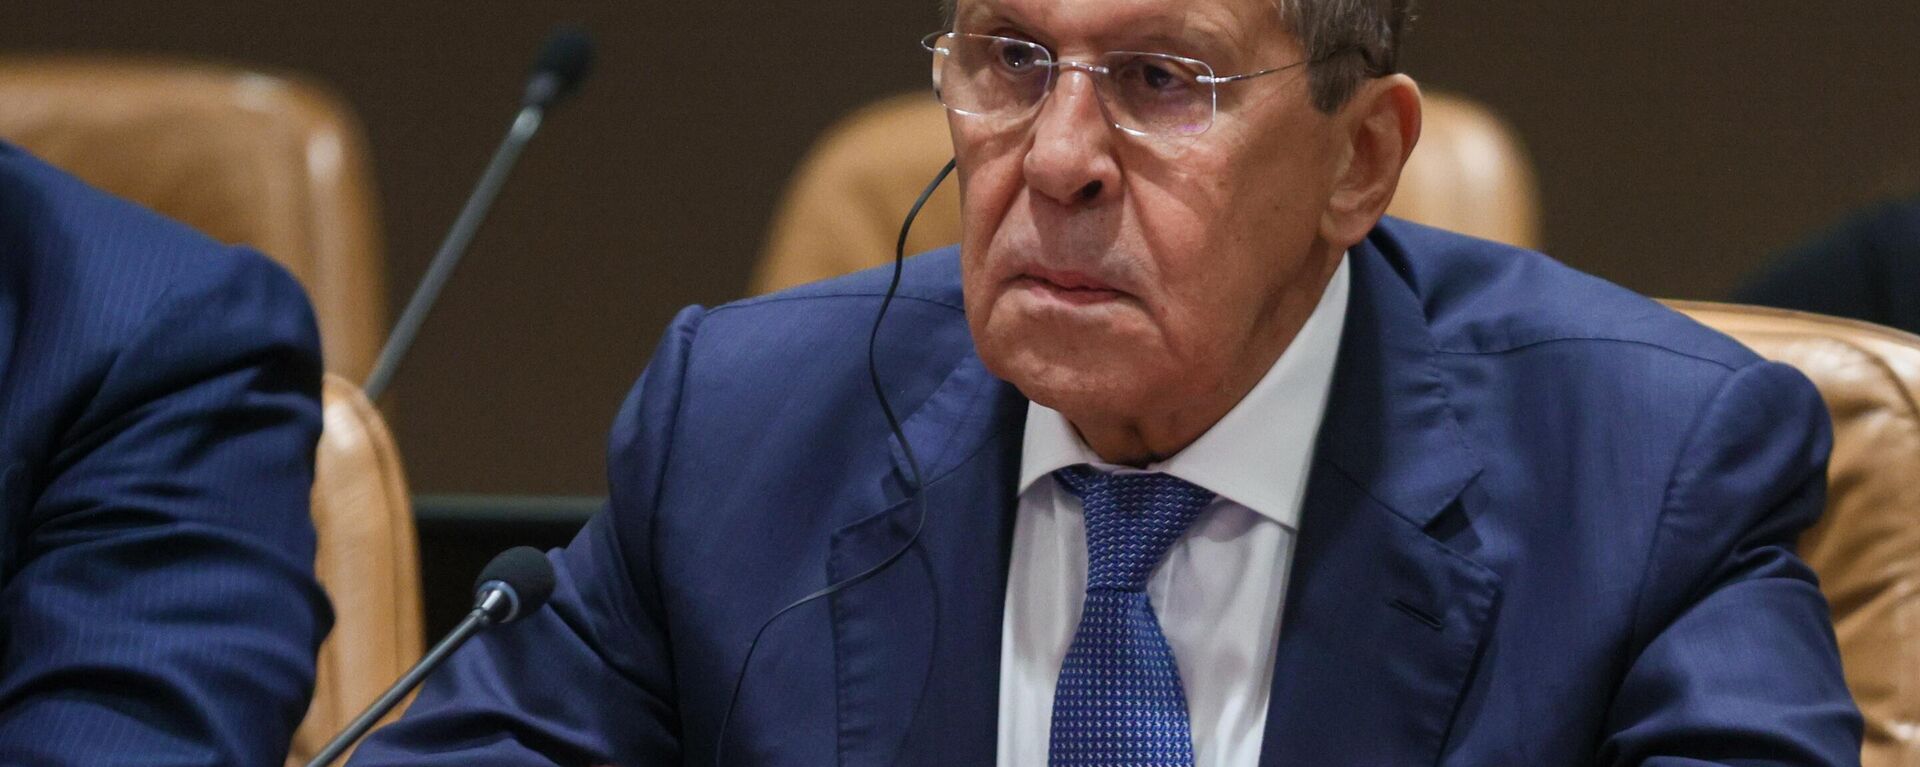 Russian Foreign Minister Sergei Lavrov during a meeting with his Chinese counterpart during the 77th session of the United Nations General Assembly in New York. - Sputnik International, 1920, 24.09.2022